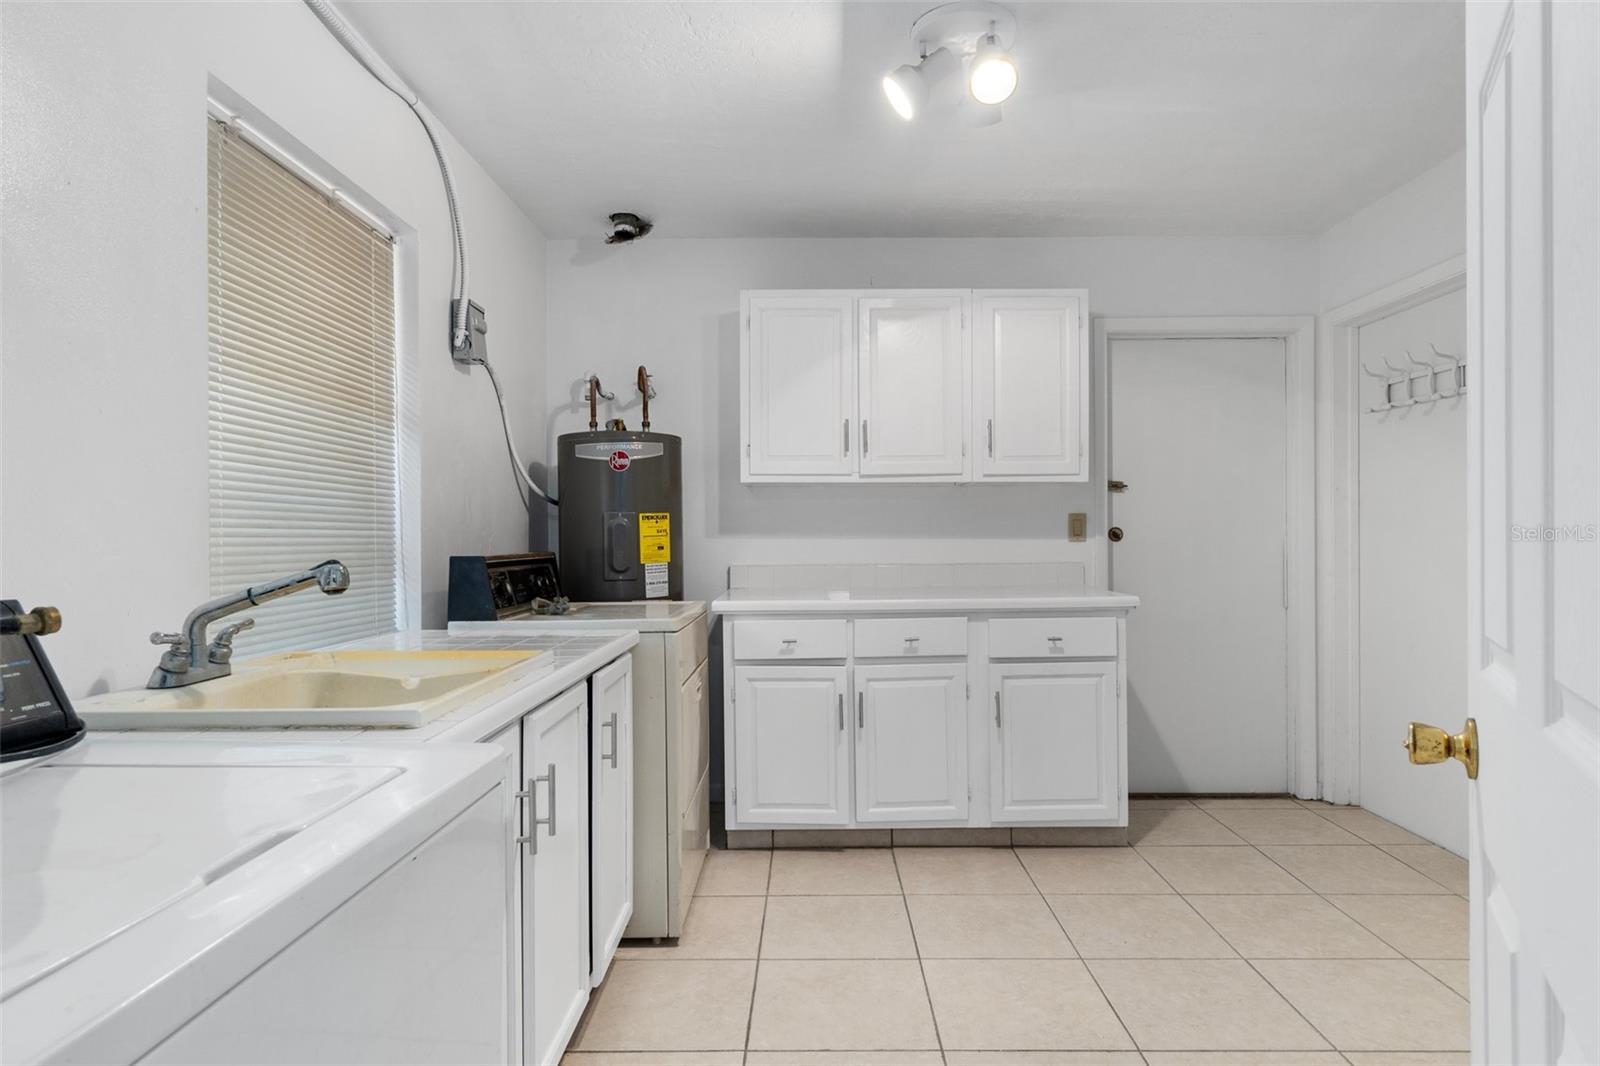 Huge Laundry room with lots of cabinets and counter top space including a sink and washer and dryer